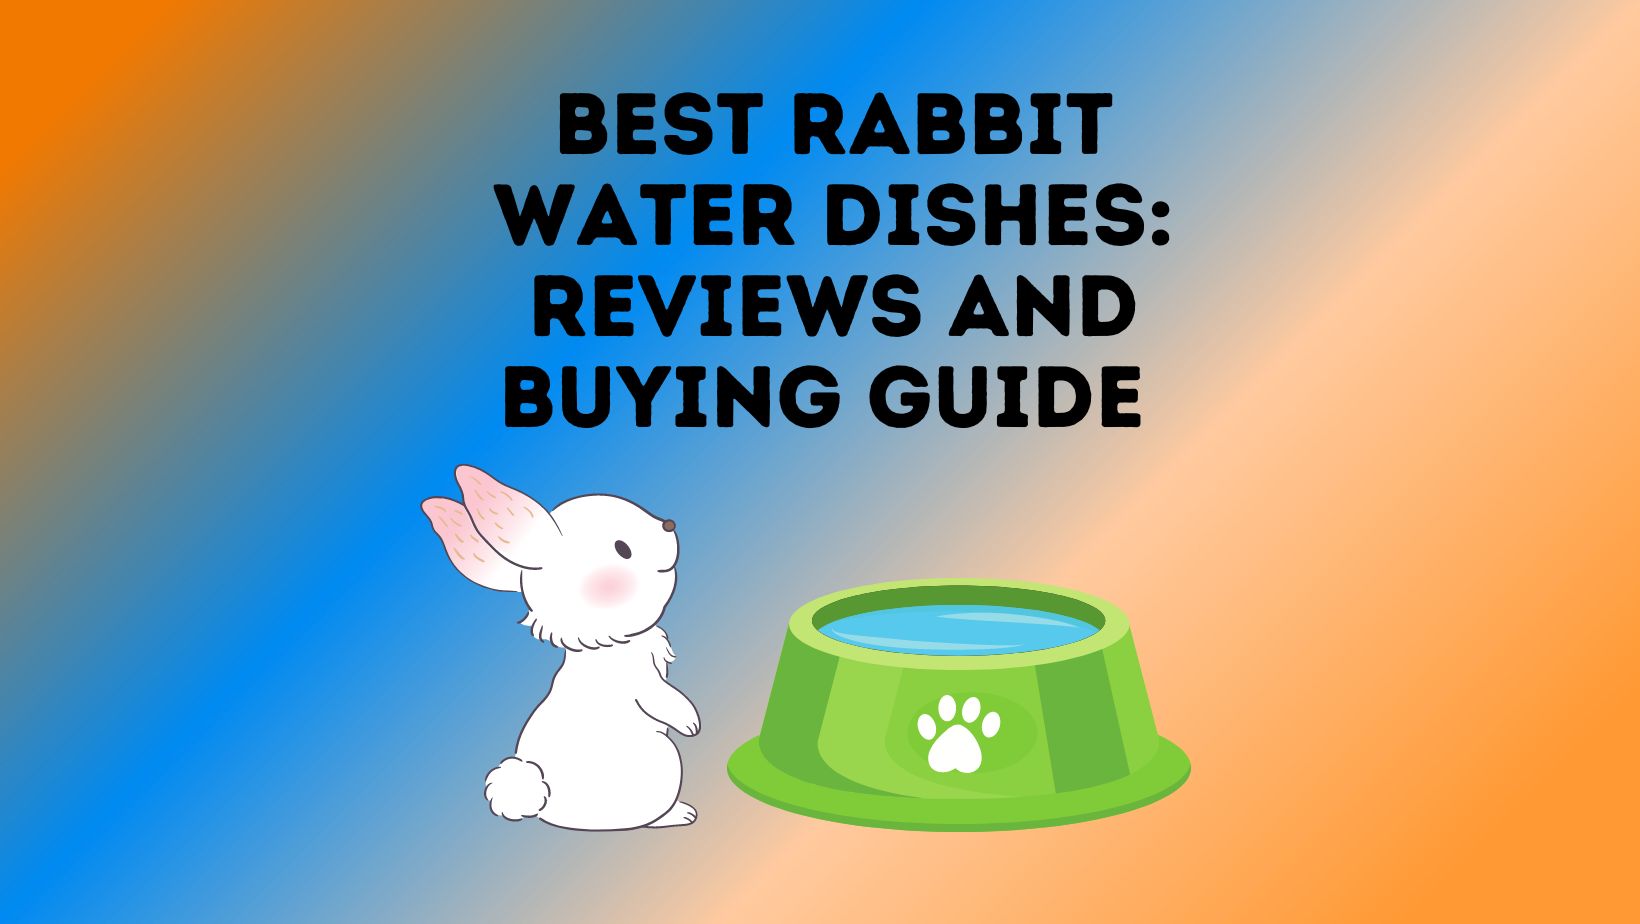 Best Rabbit Water Dishes Reviews and Buying Guide